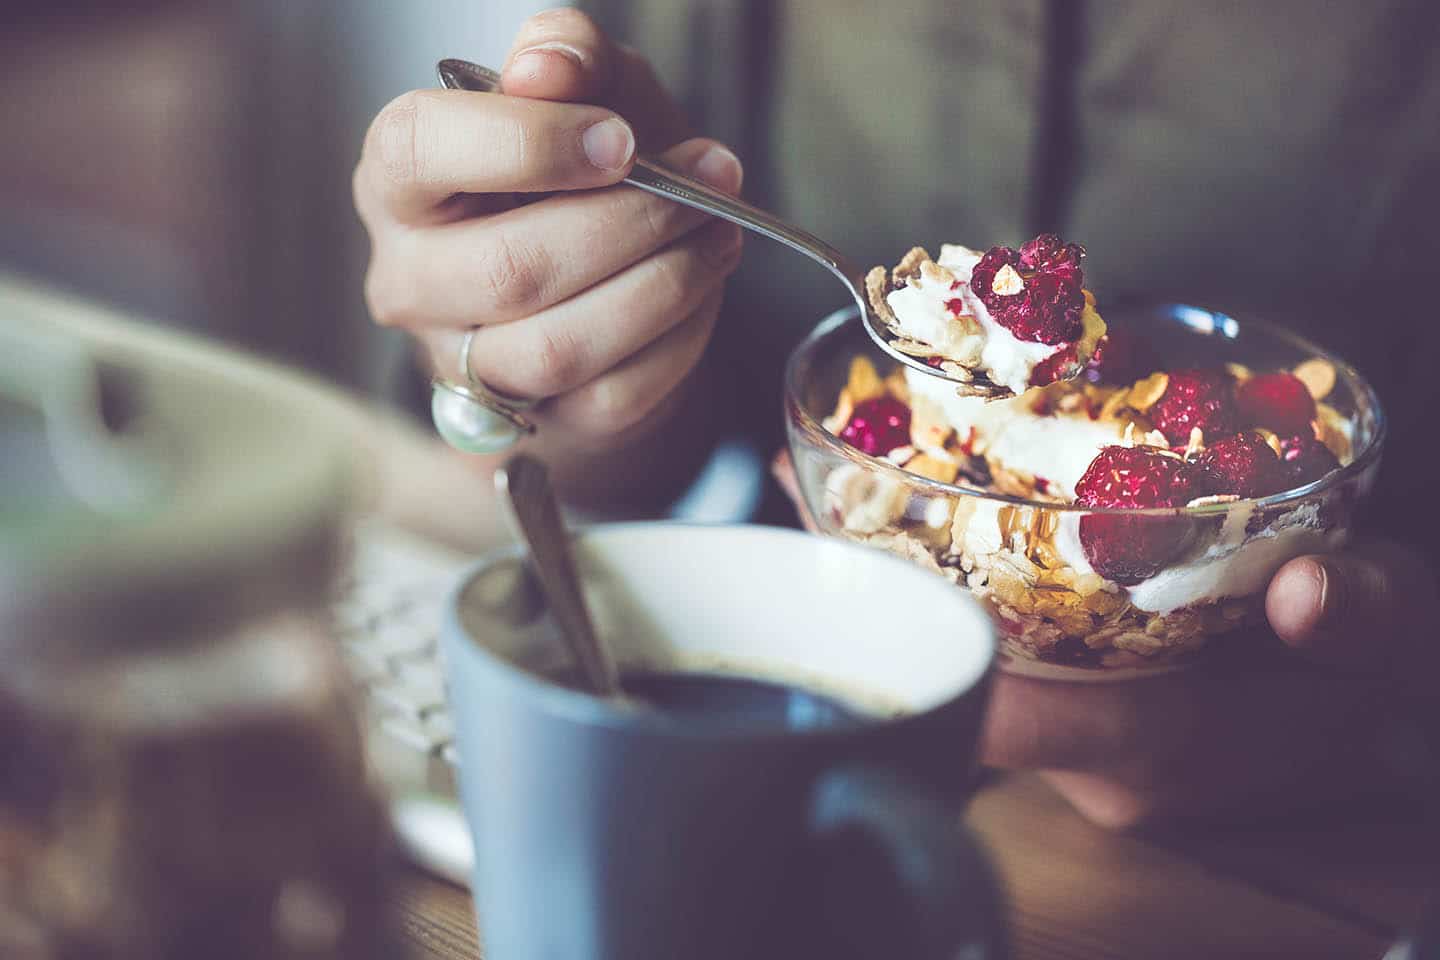 A bowl of yogurt, granola, and berries, with a cup of coffee